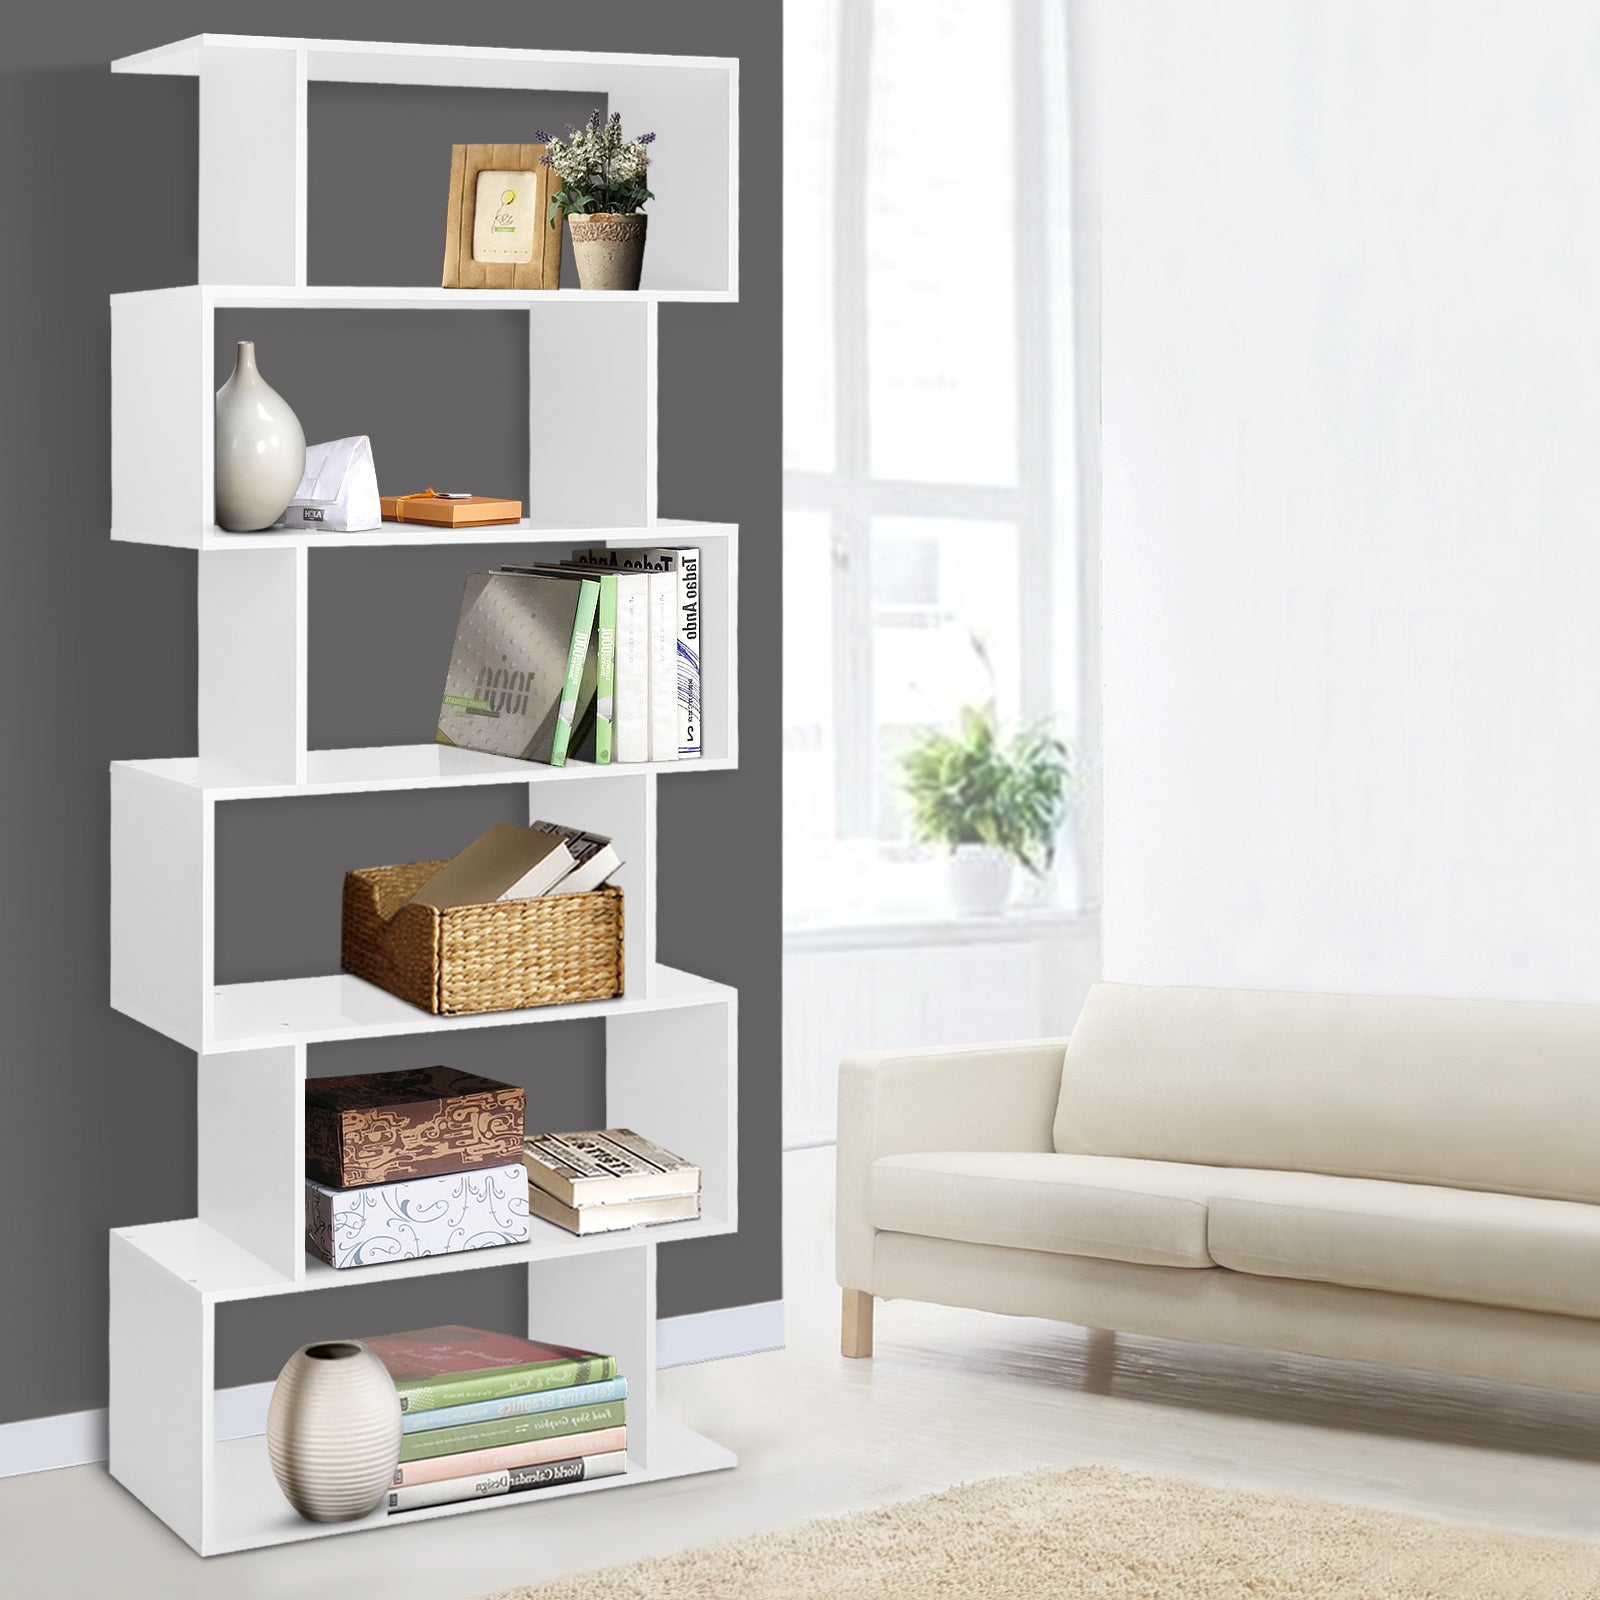 6 Tier Display Shelf - White Bookcase Fast shipping On sale